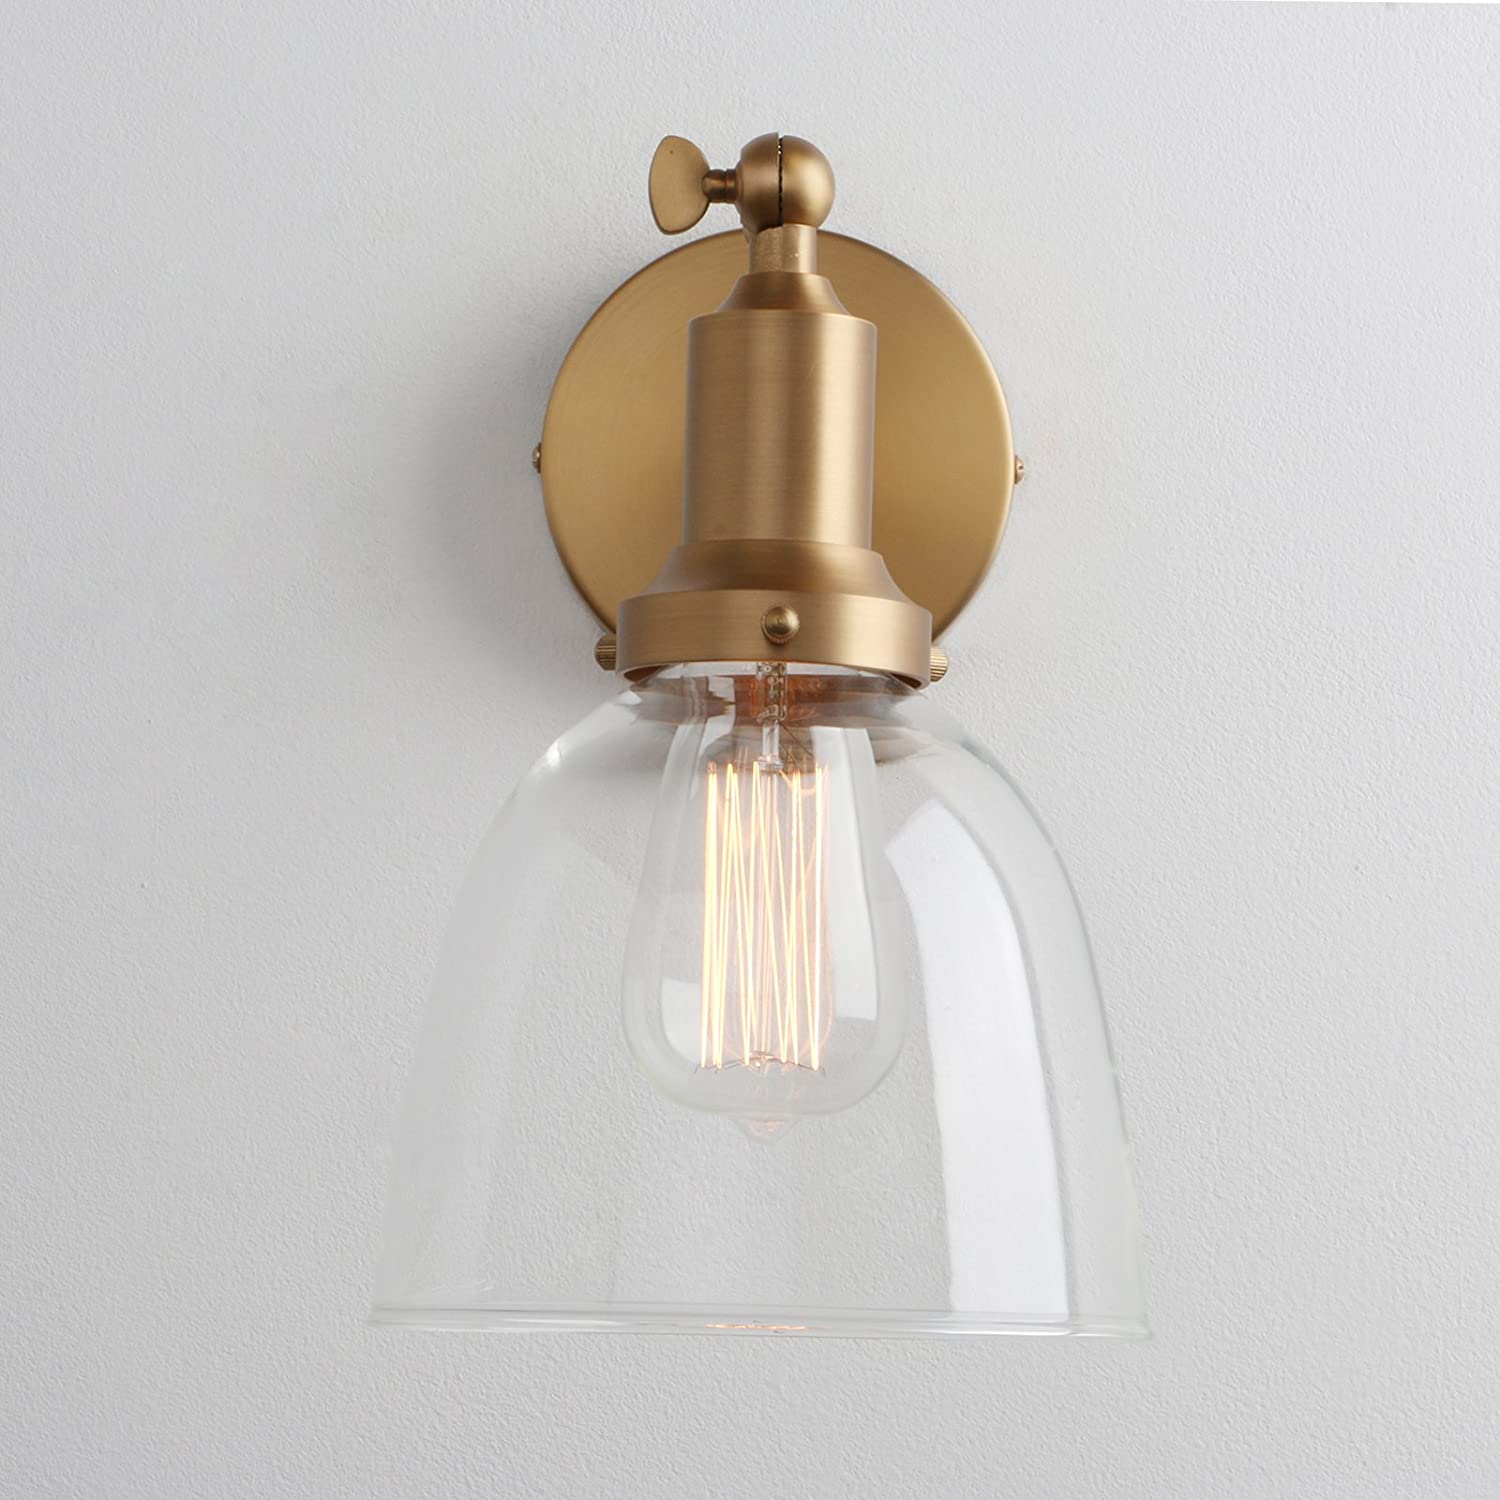 Industrial slope pole wall mount fixture clear glass wall lamp